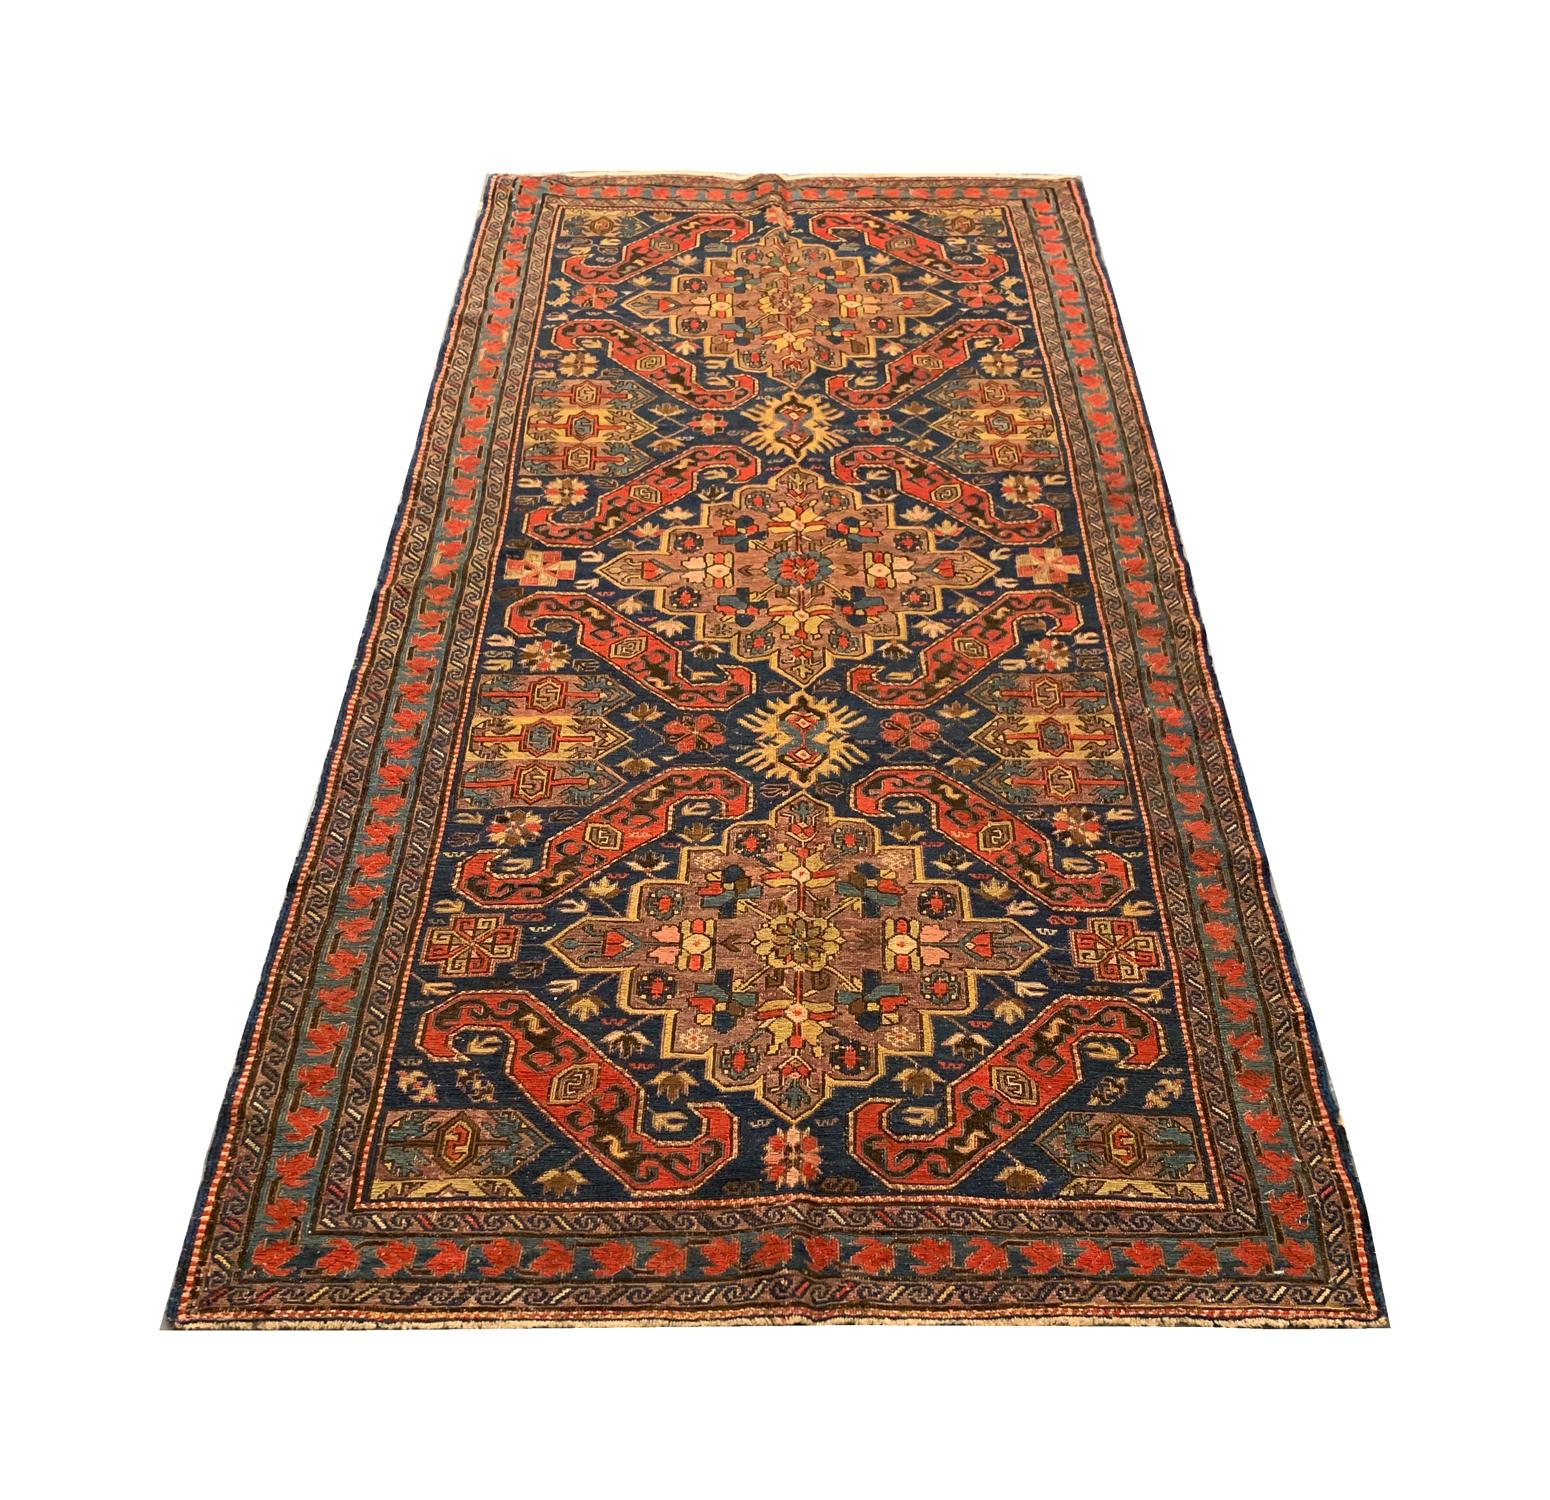 This fine wool rug is an excellent example of kilim Sumakh Caucasian rugs woven in the 1880s. The central design features a trio of large medallions woven on a deep blue background in cream, brown, orange, and blue accents. The colour and design in